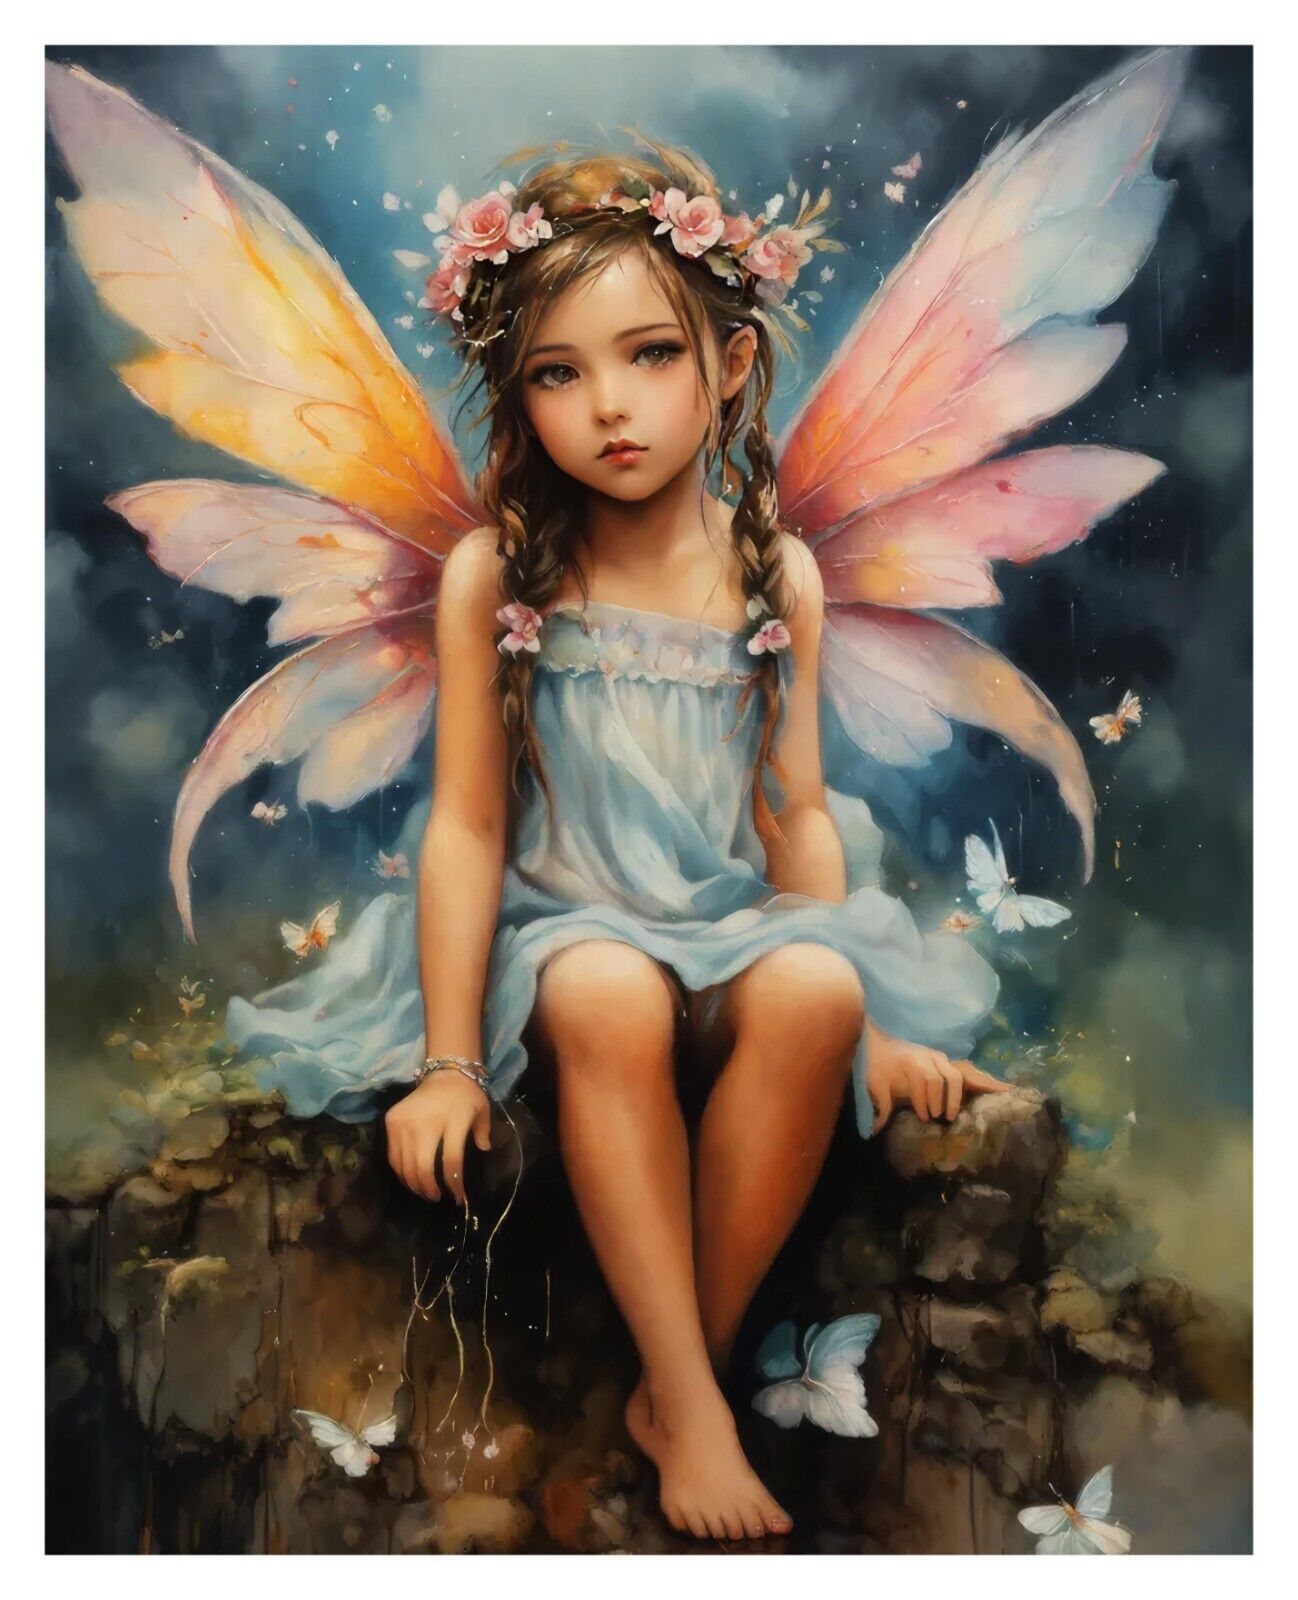 FAIRY ARTISTIC 8X10 COLLECTIBLE FANTASY ART PRINT HIGH QUALITY GLOSSY PHOTO